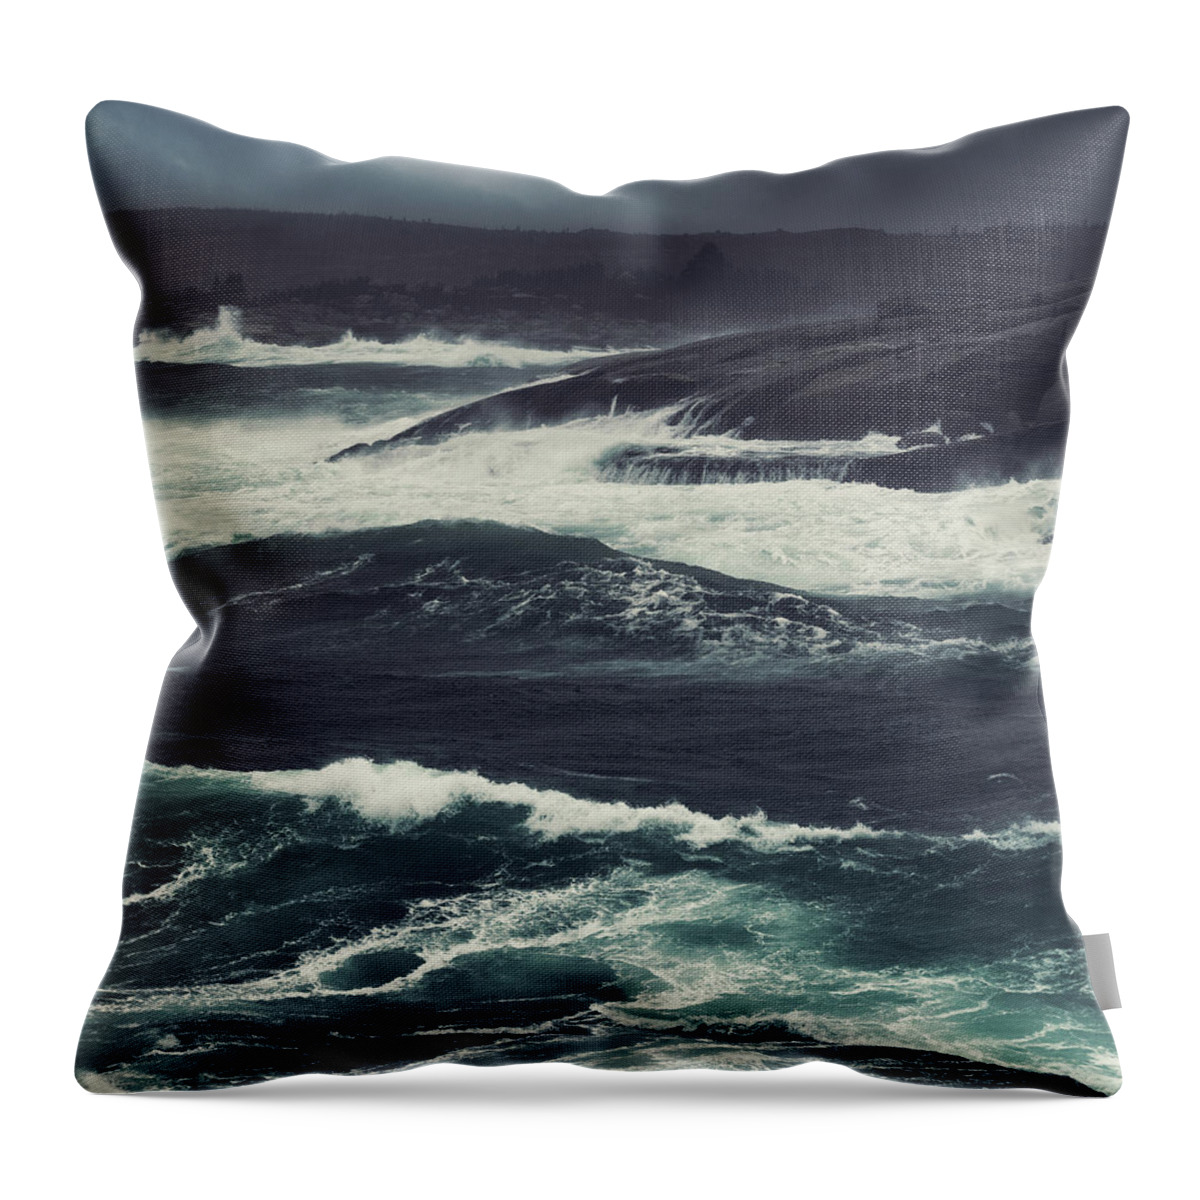 Scenics Throw Pillow featuring the photograph Dark Tide by Shaunl